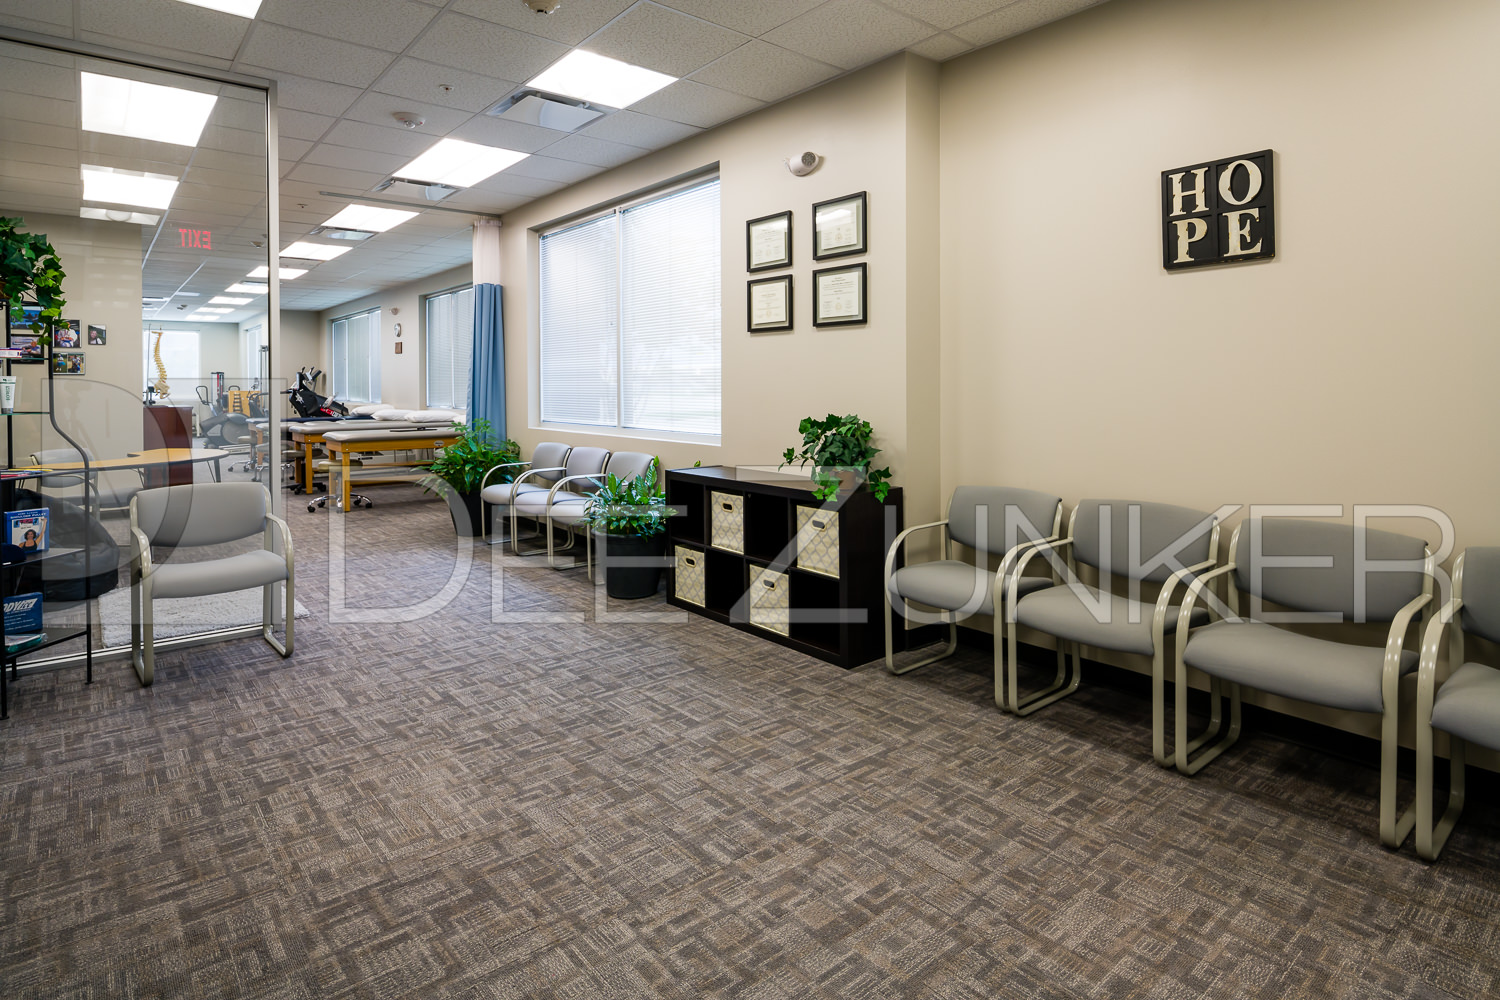 Hope-Rehab-Katy Houston Commercial Architectural Photographer Dee Zunker